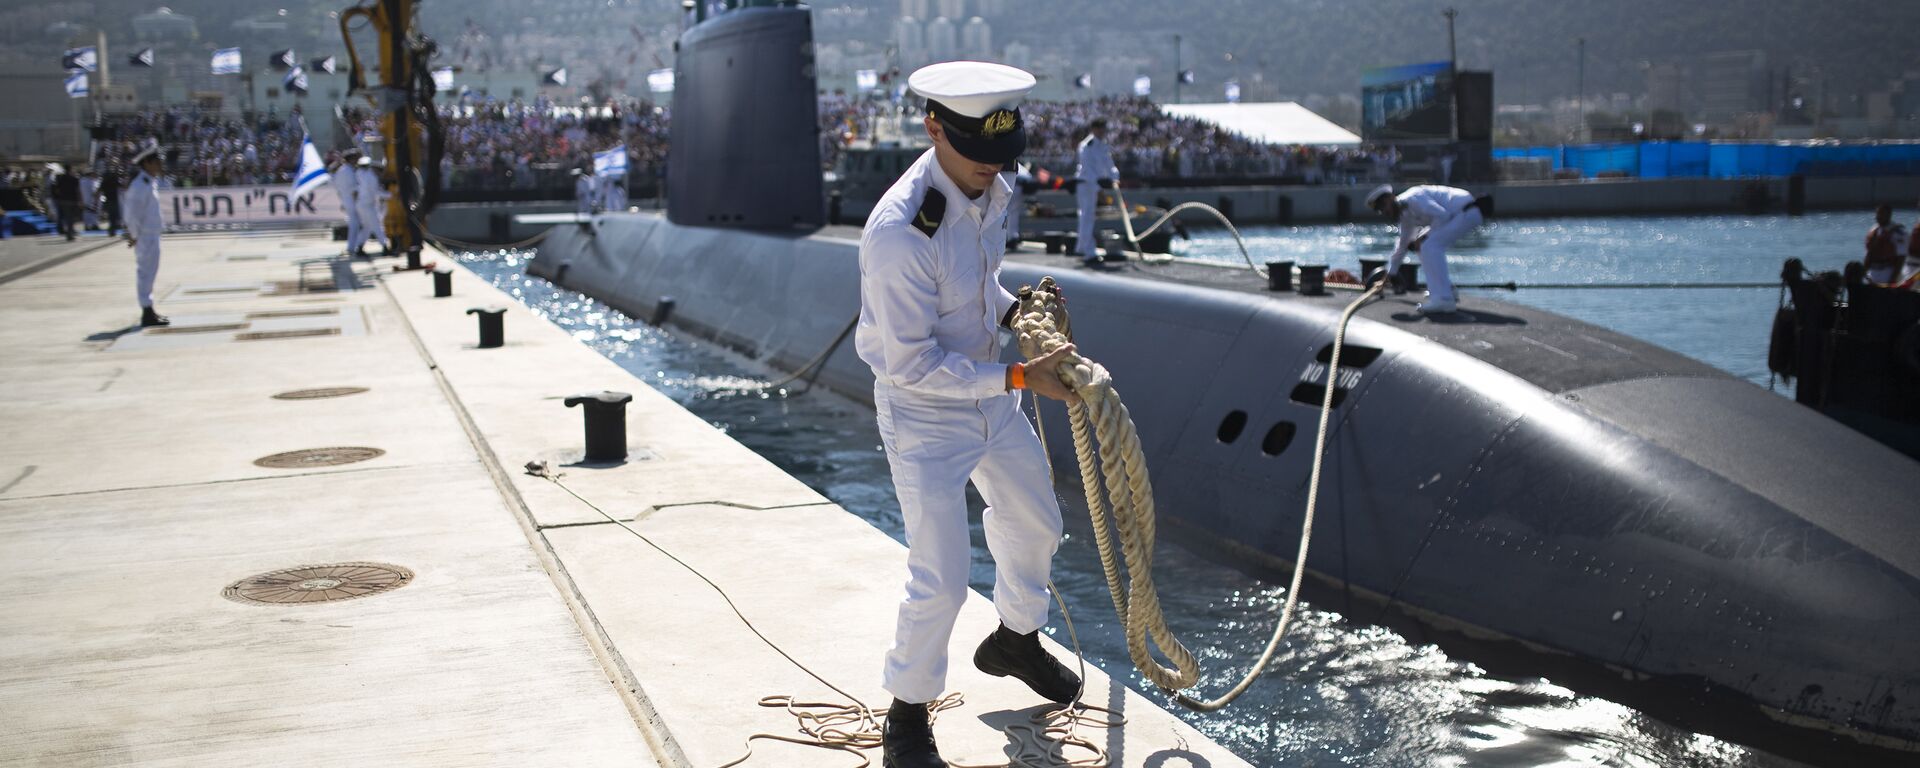 An Israeli naval officer holds the mooring rope of the INS Tanin, a Dolphin AIP class submarine, as it docks at a naval base in the northern city of Haifa, after its arrival in Israel (File) - Sputnik International, 1920, 14.06.2019